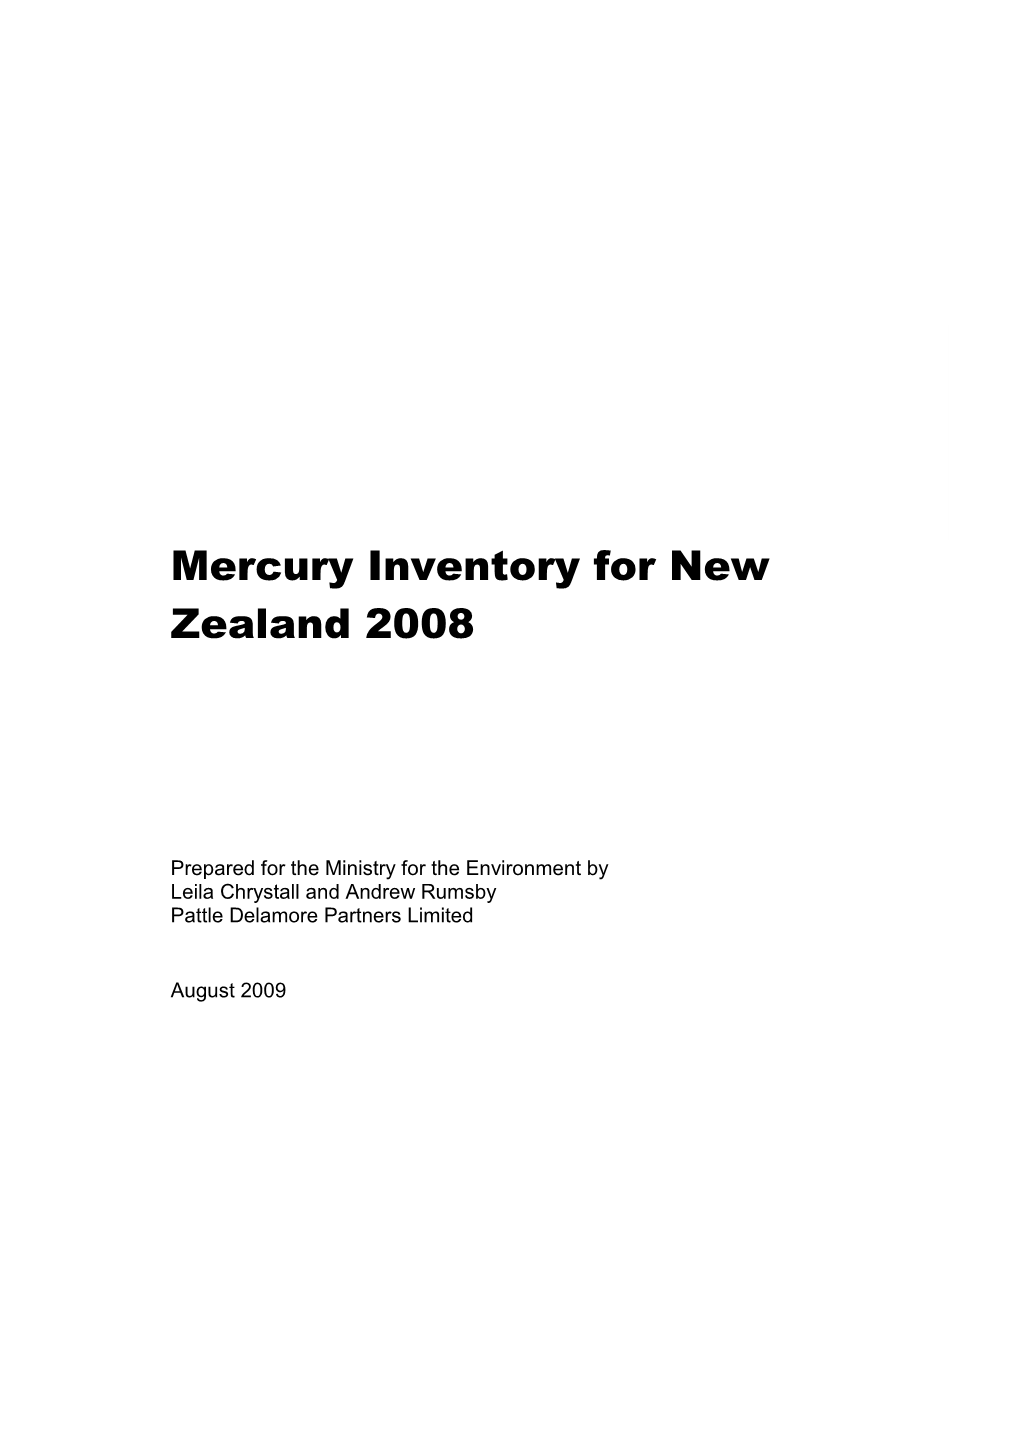 Mercury Inventory for New Zealand FINAL